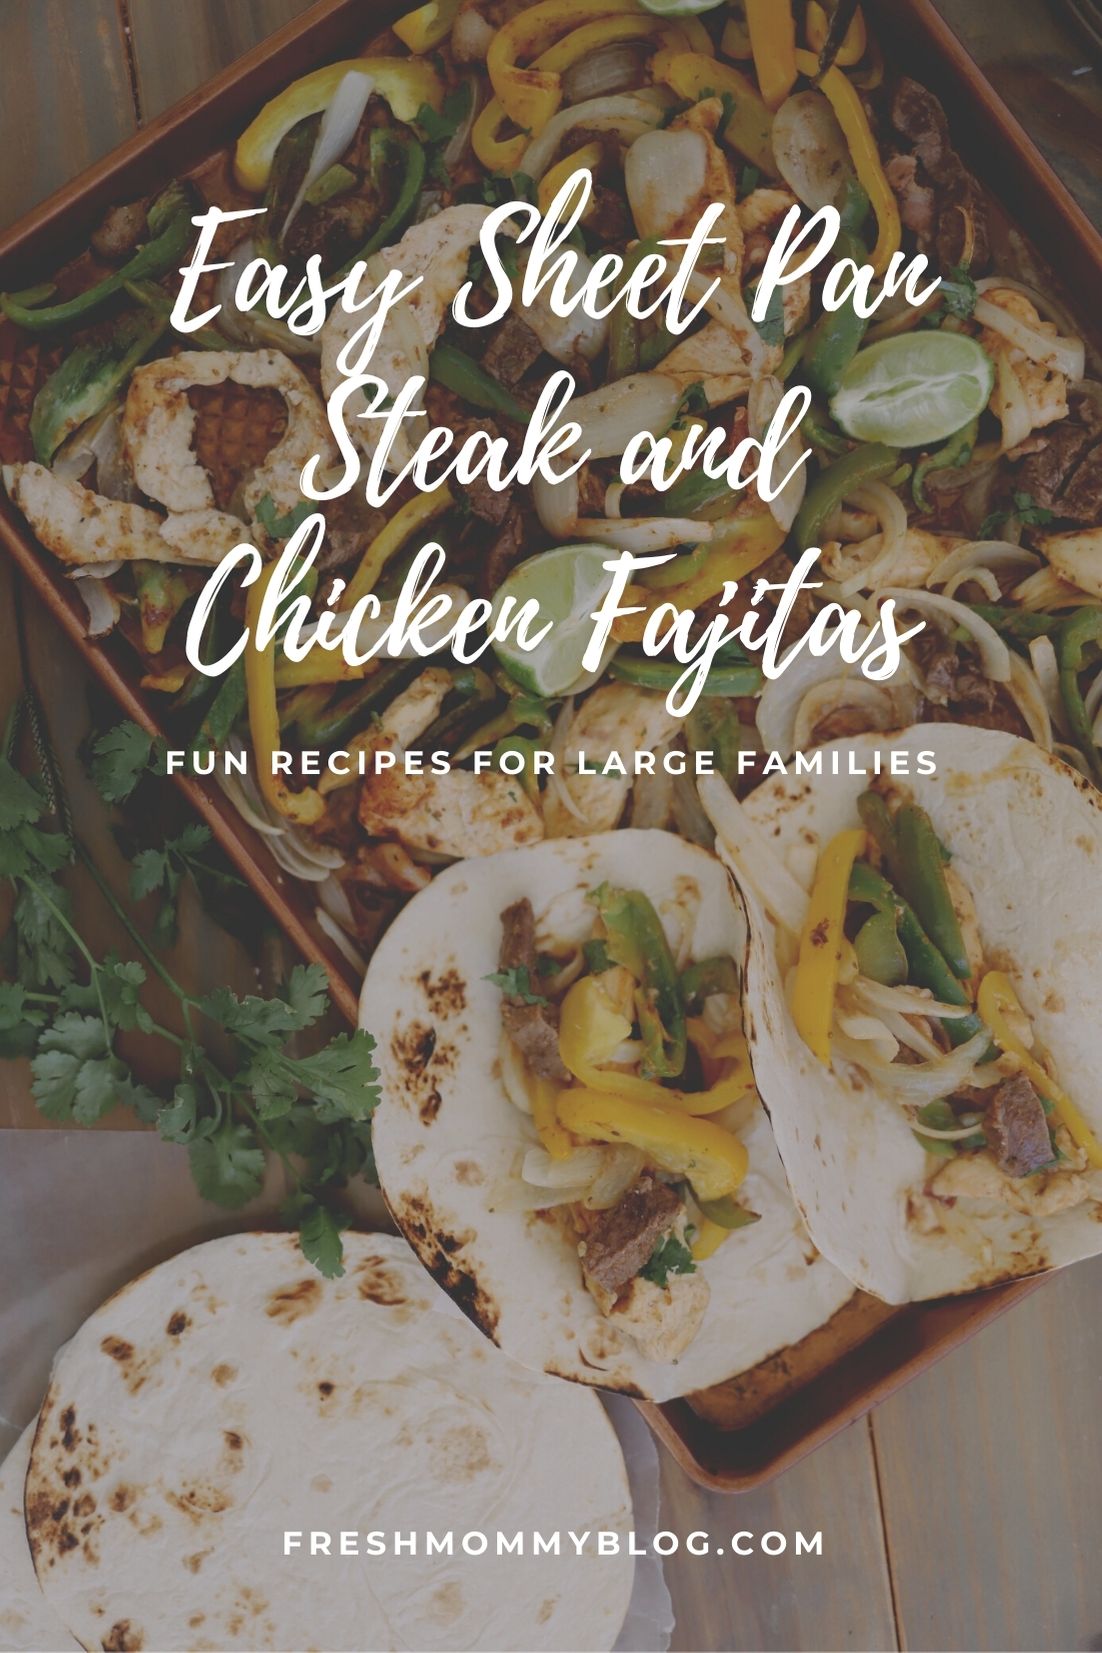 Steak and Chicken Fajitas: Sheet Pan Dinners for a Large Family from top US Lifestyle Blogger Tabitha Blue of Fresh Mommy Blog.